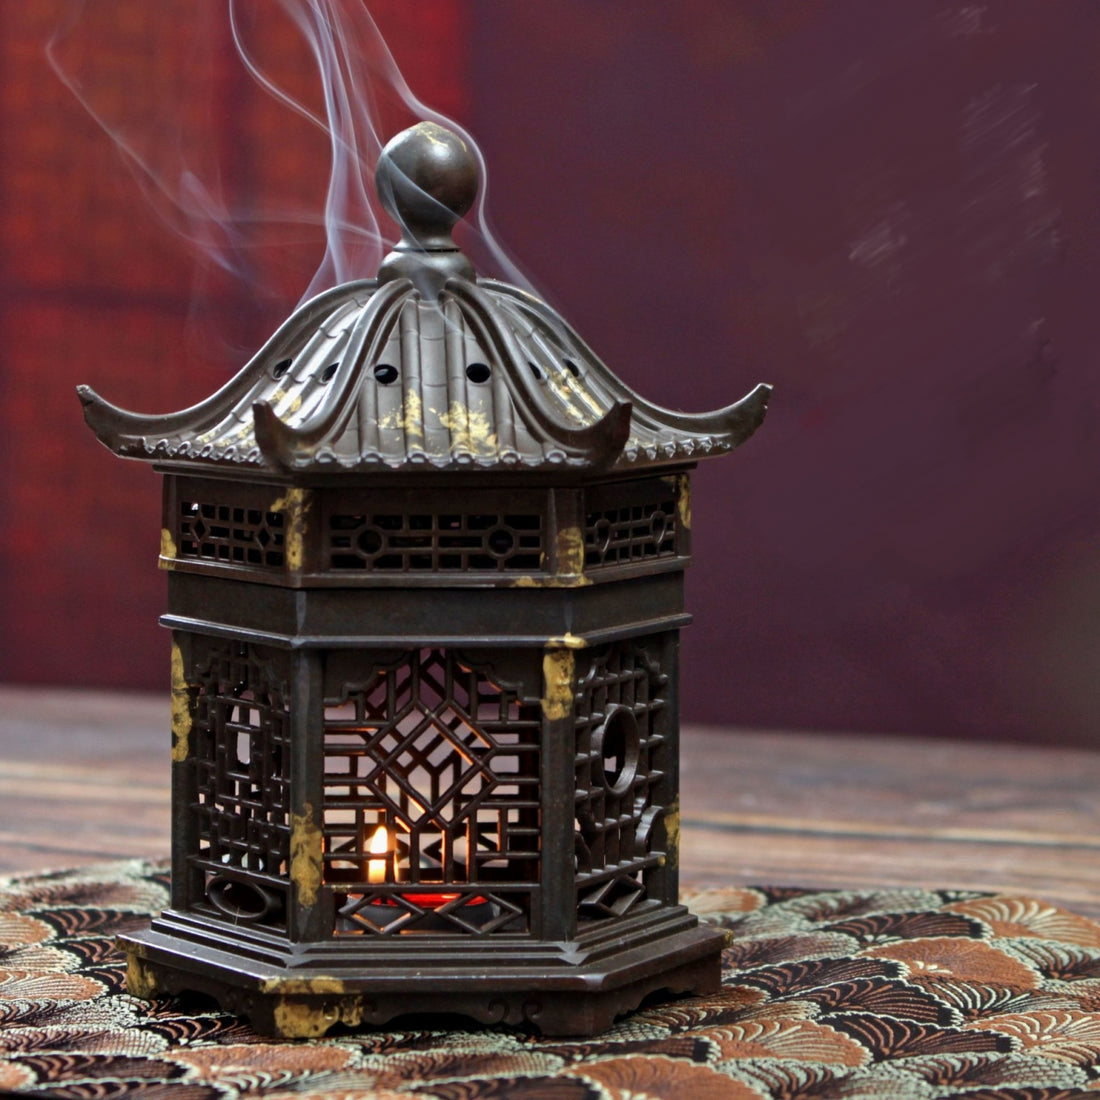 What Are Chinese Incense For?